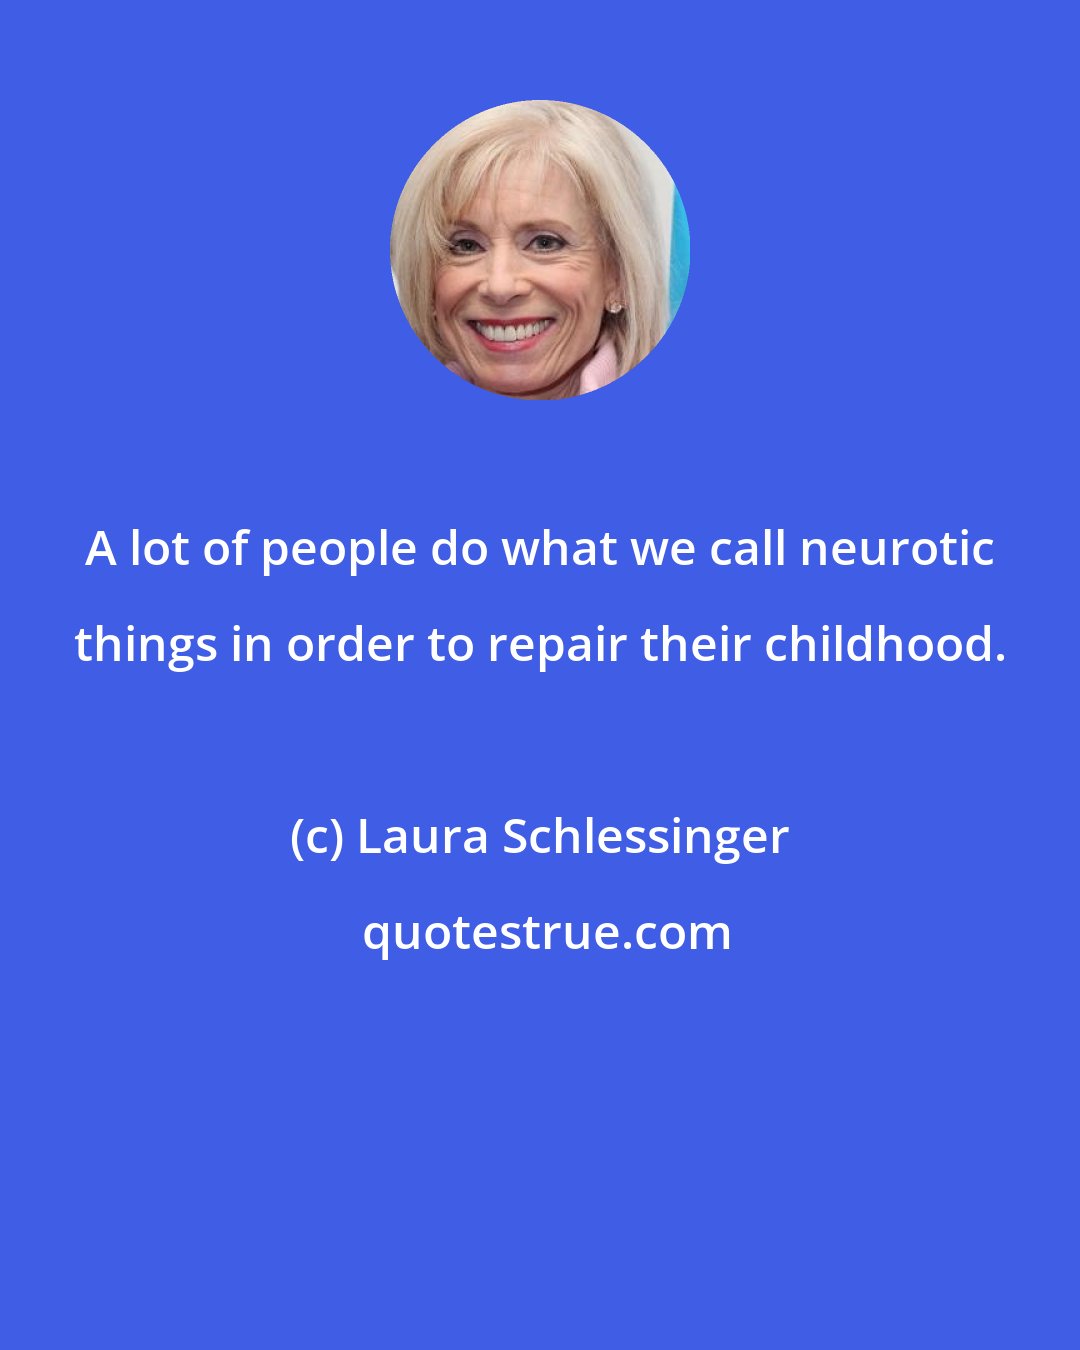 Laura Schlessinger: A lot of people do what we call neurotic things in order to repair their childhood.